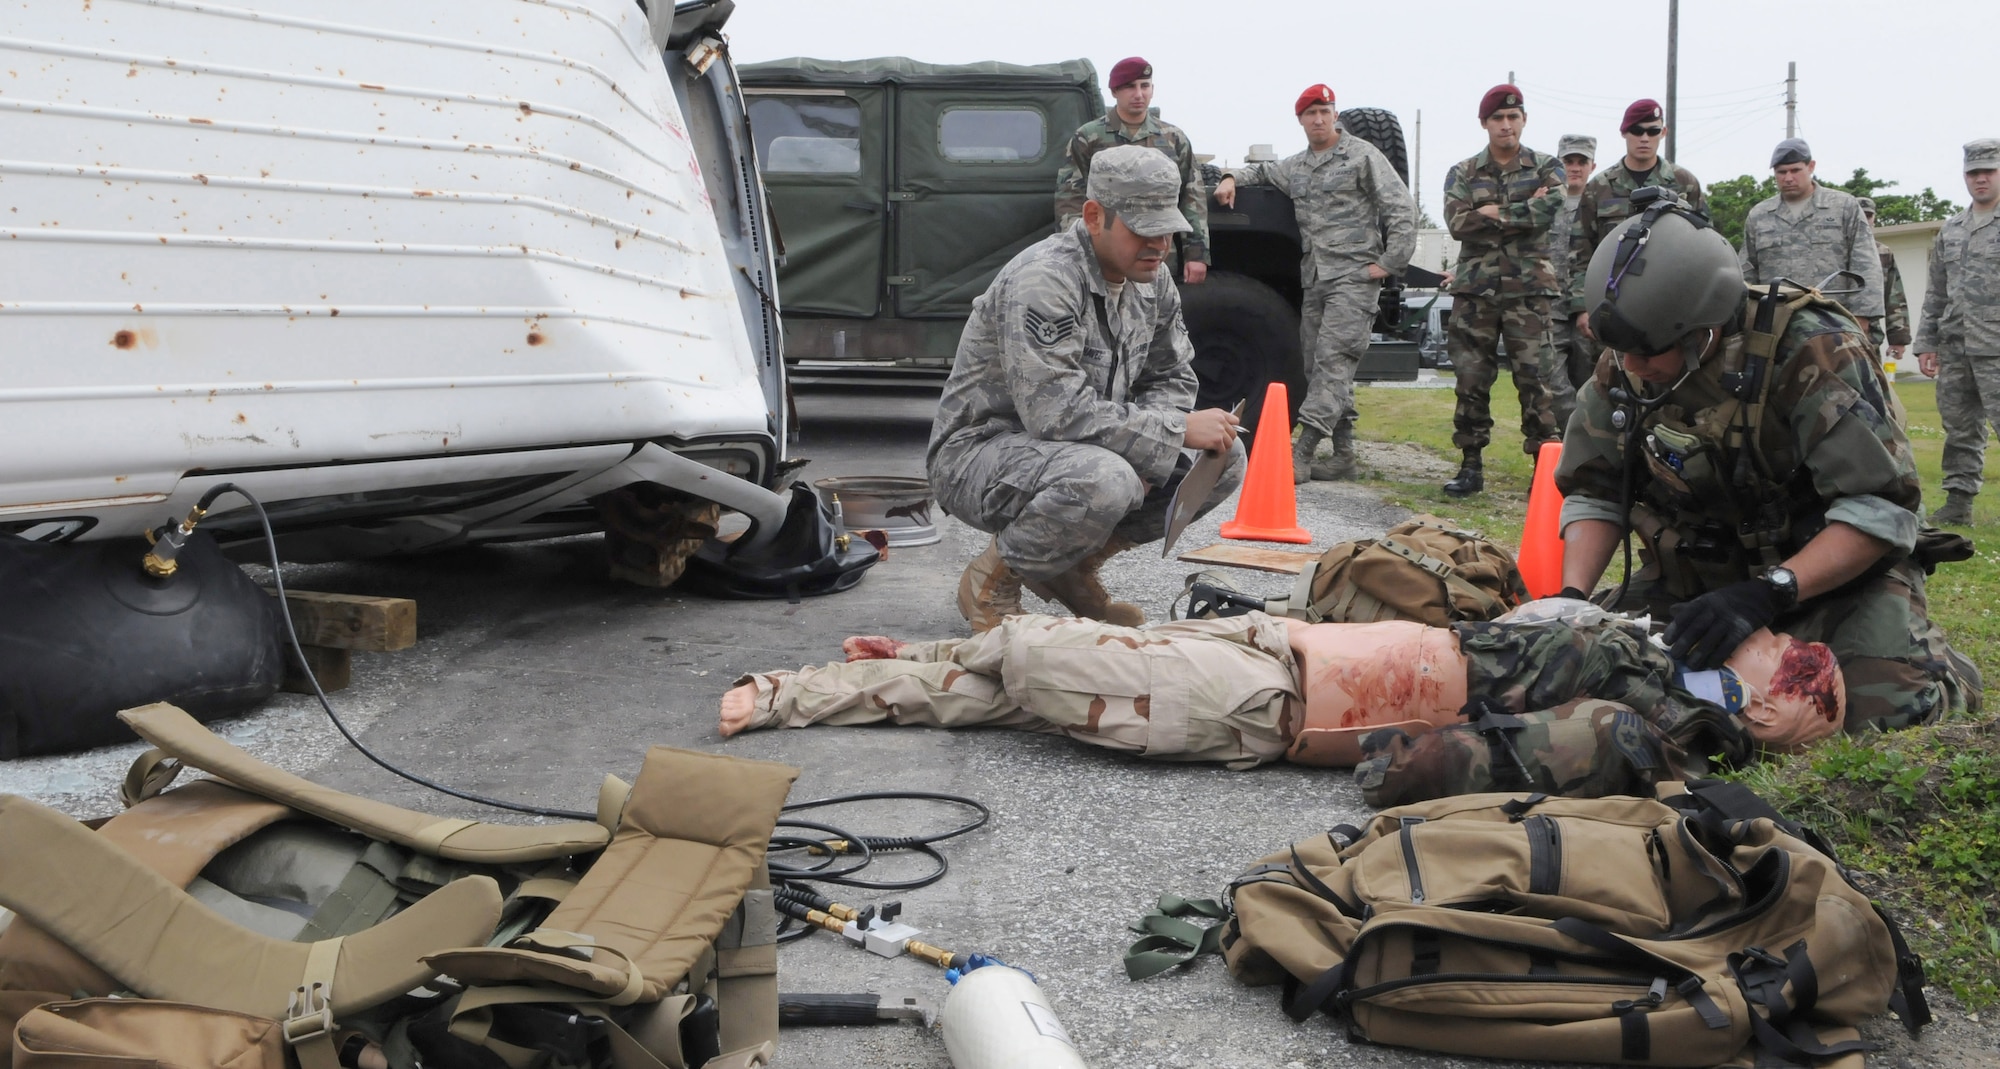 KADENA AIR BASE, Japan -- A pararescueman from the 320th Special Tactics Squadron checks for vitals on a simulated patient after pulling the victim from under a vehicle as the squadron's independent duty medical technician evaluates during a training exercise here April 16. Pararescuemen are the only Department of Defense specialty specifically trained and equipped to conduct conventional or unconventional rescue operations. These battlefield Airmen are personnel recovery specialists with emergency medical capabilities able to locate and save injured personnel anytime, anywhere. (Photo by Tech. Sgt. Aaron Cram)